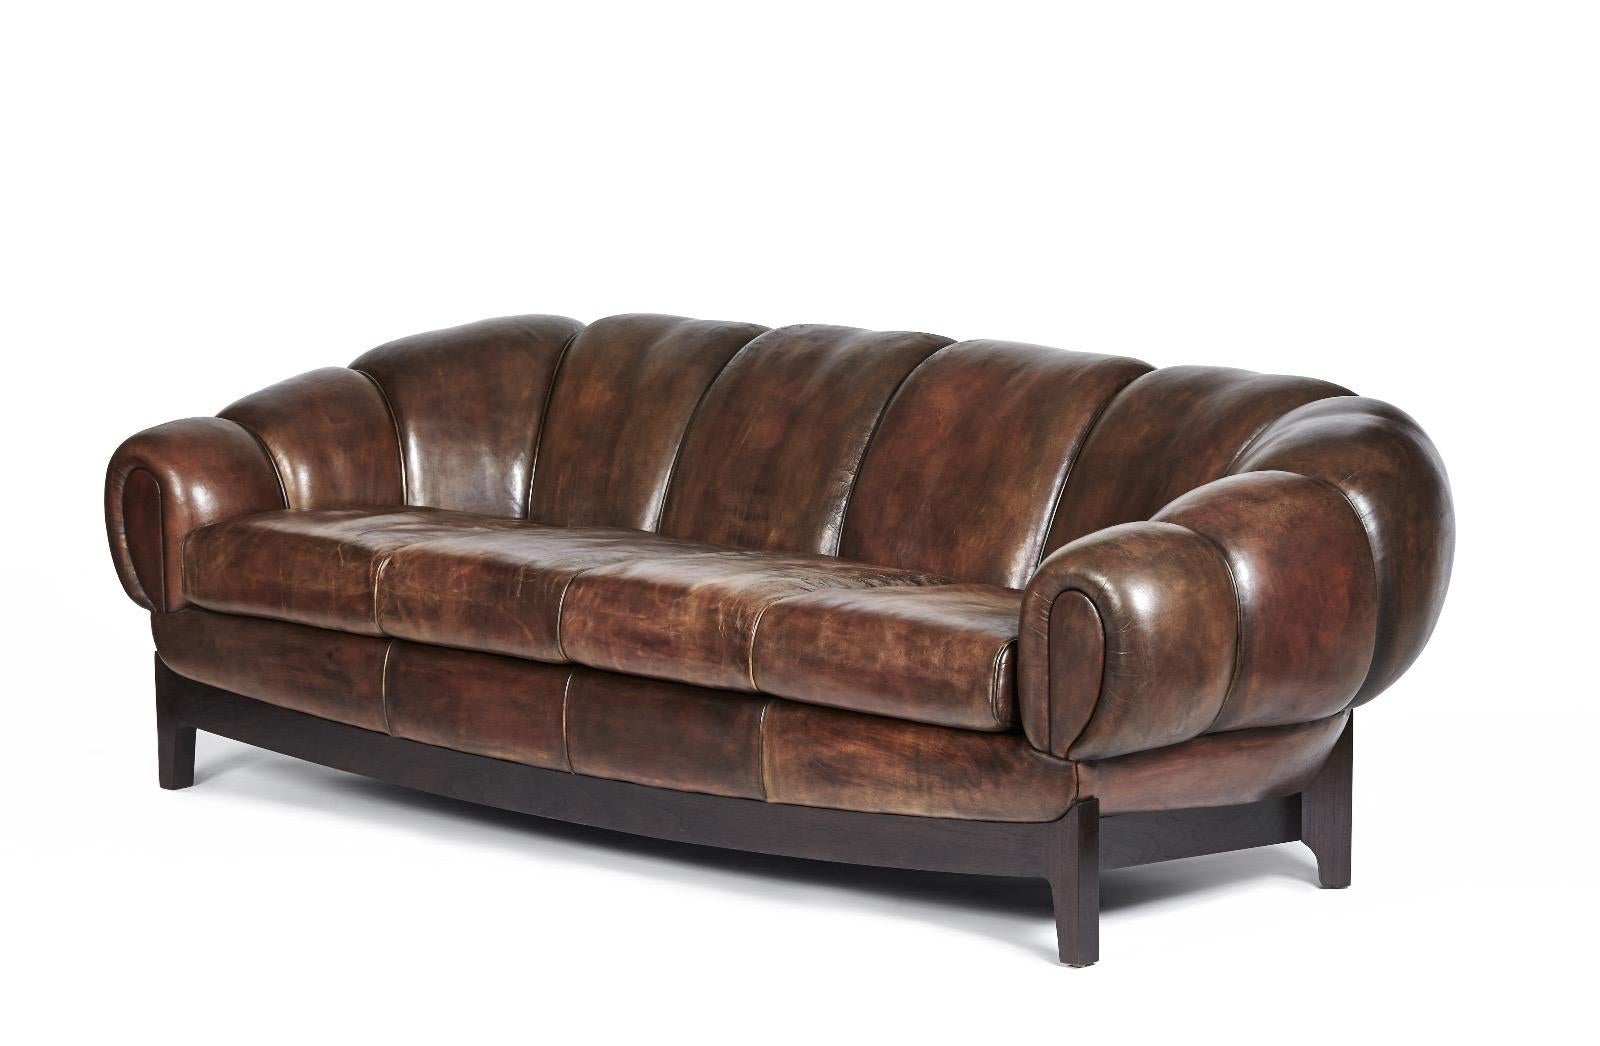 Jean De Merry Sāo Leather Sofa

Jean de Merry is a luxury furniture line of timeless, poetic and French deco-inspired pieces, thoughtfully designed and expertly handcrafted. 

Jean de Merry was established in 2001. A marriage of quality